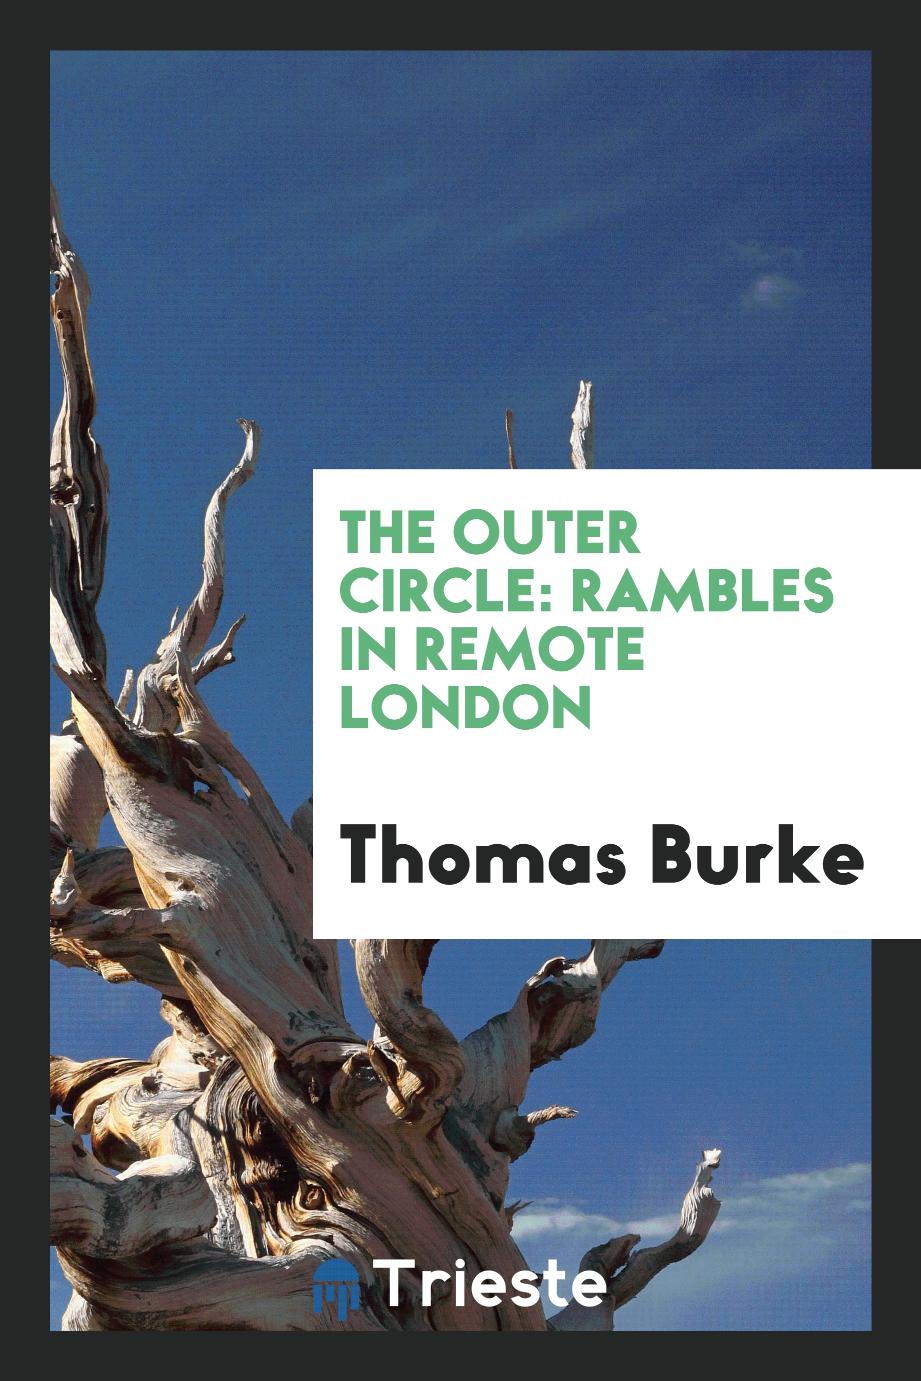 The outer circle: rambles in remote London